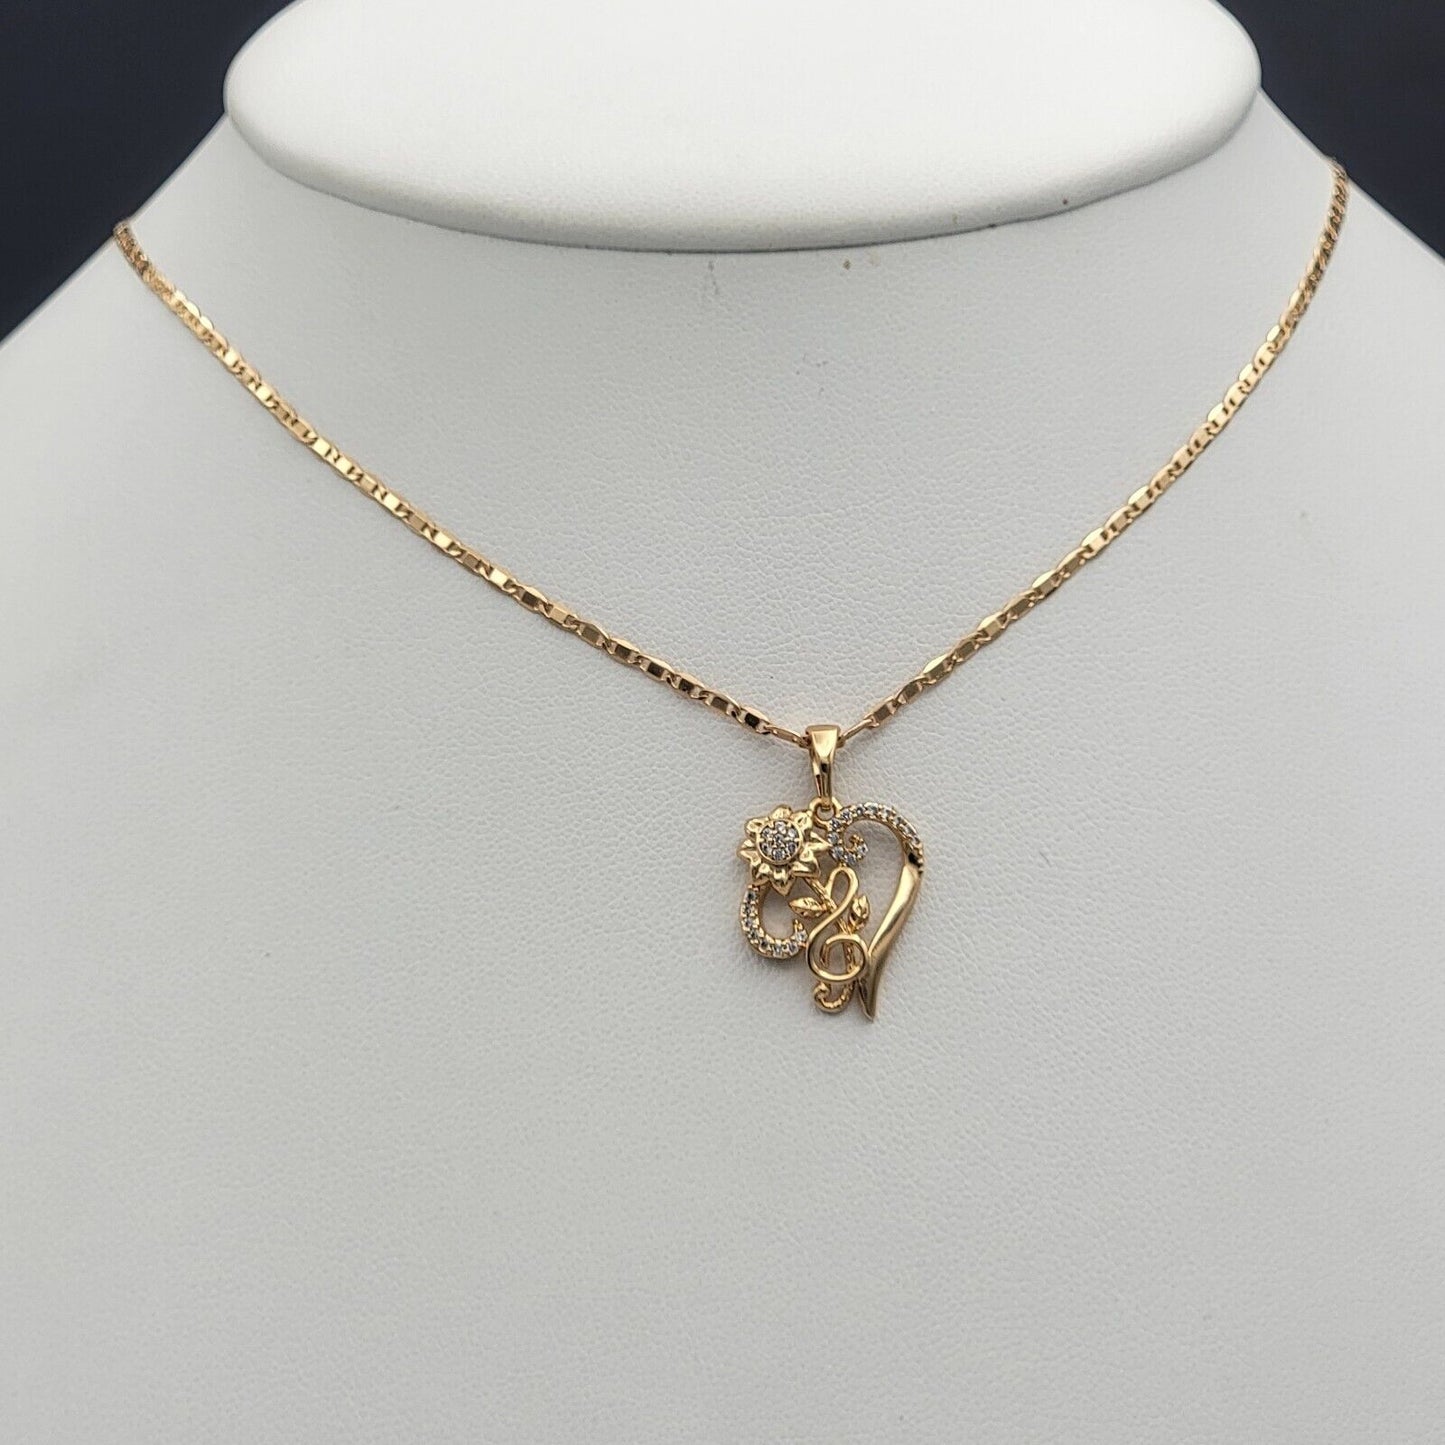 Necklaces - 18K Gold Plated. CZ Heart Sunflower Pendant & Chain.